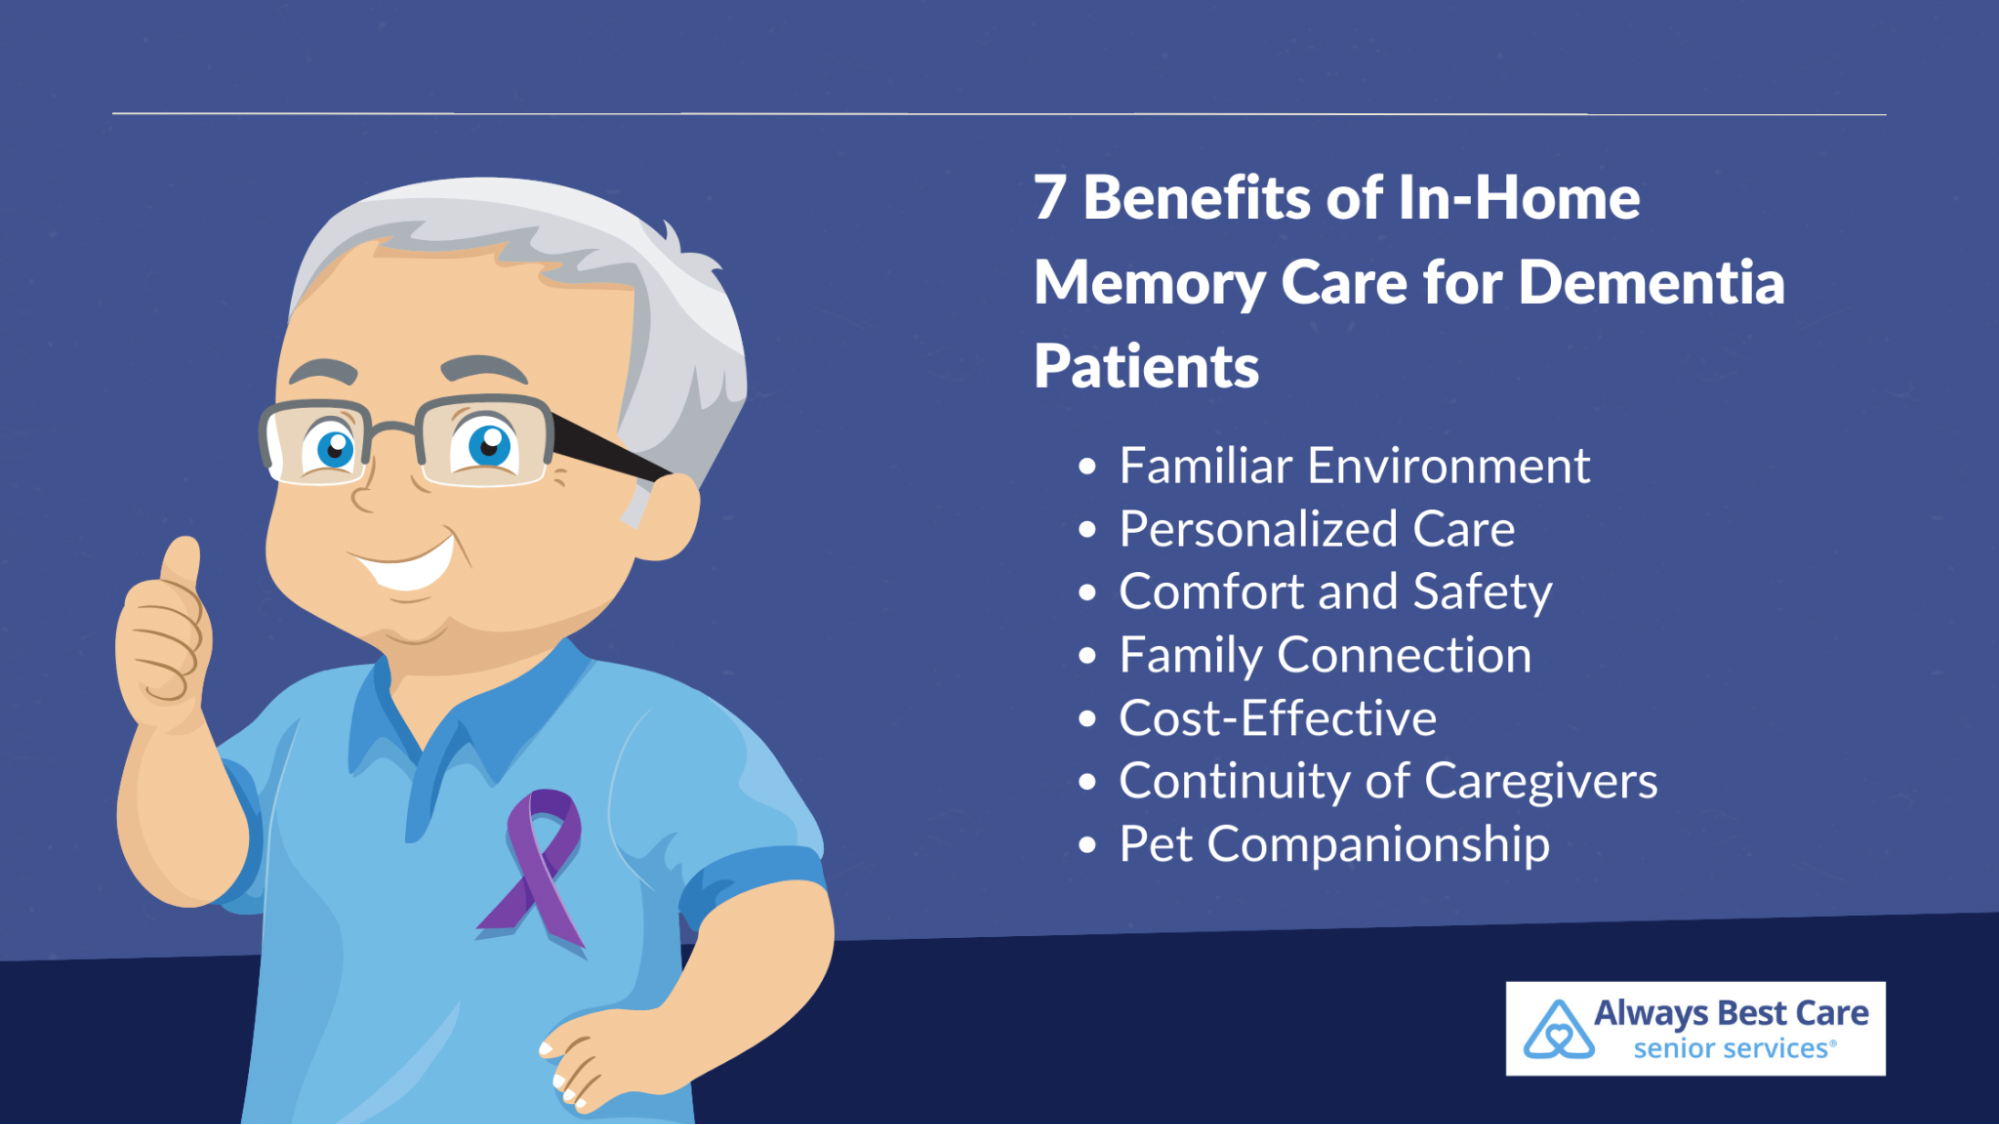 7 Benefits of In-Home Memory Care for Dementia Patients